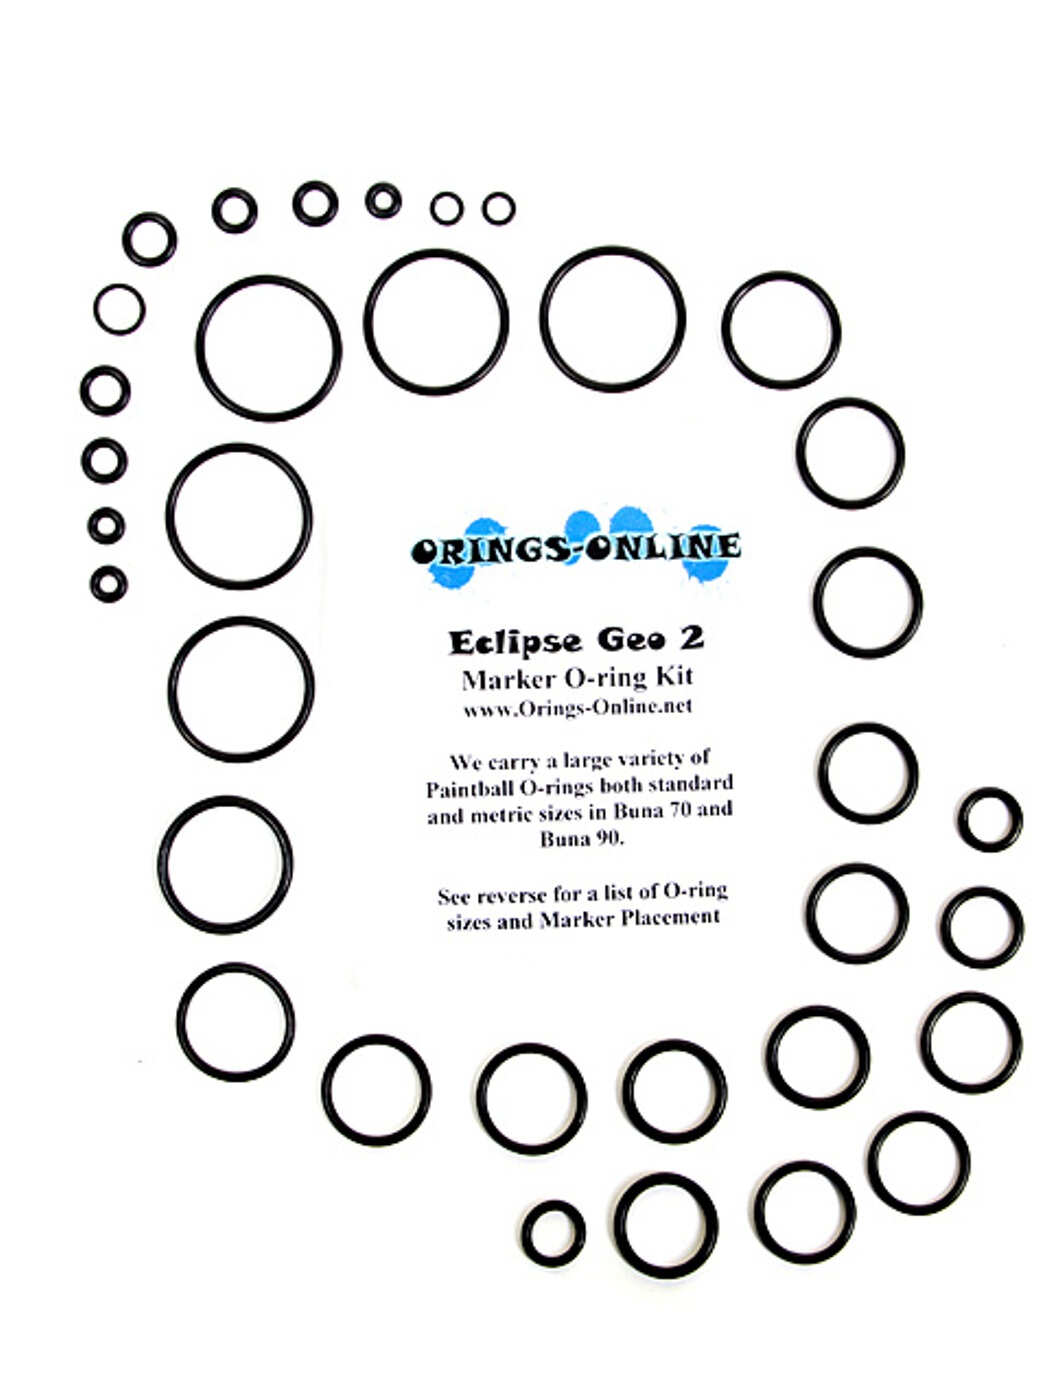 Planet Eclipse Geo 2 Marker O-ring Kit